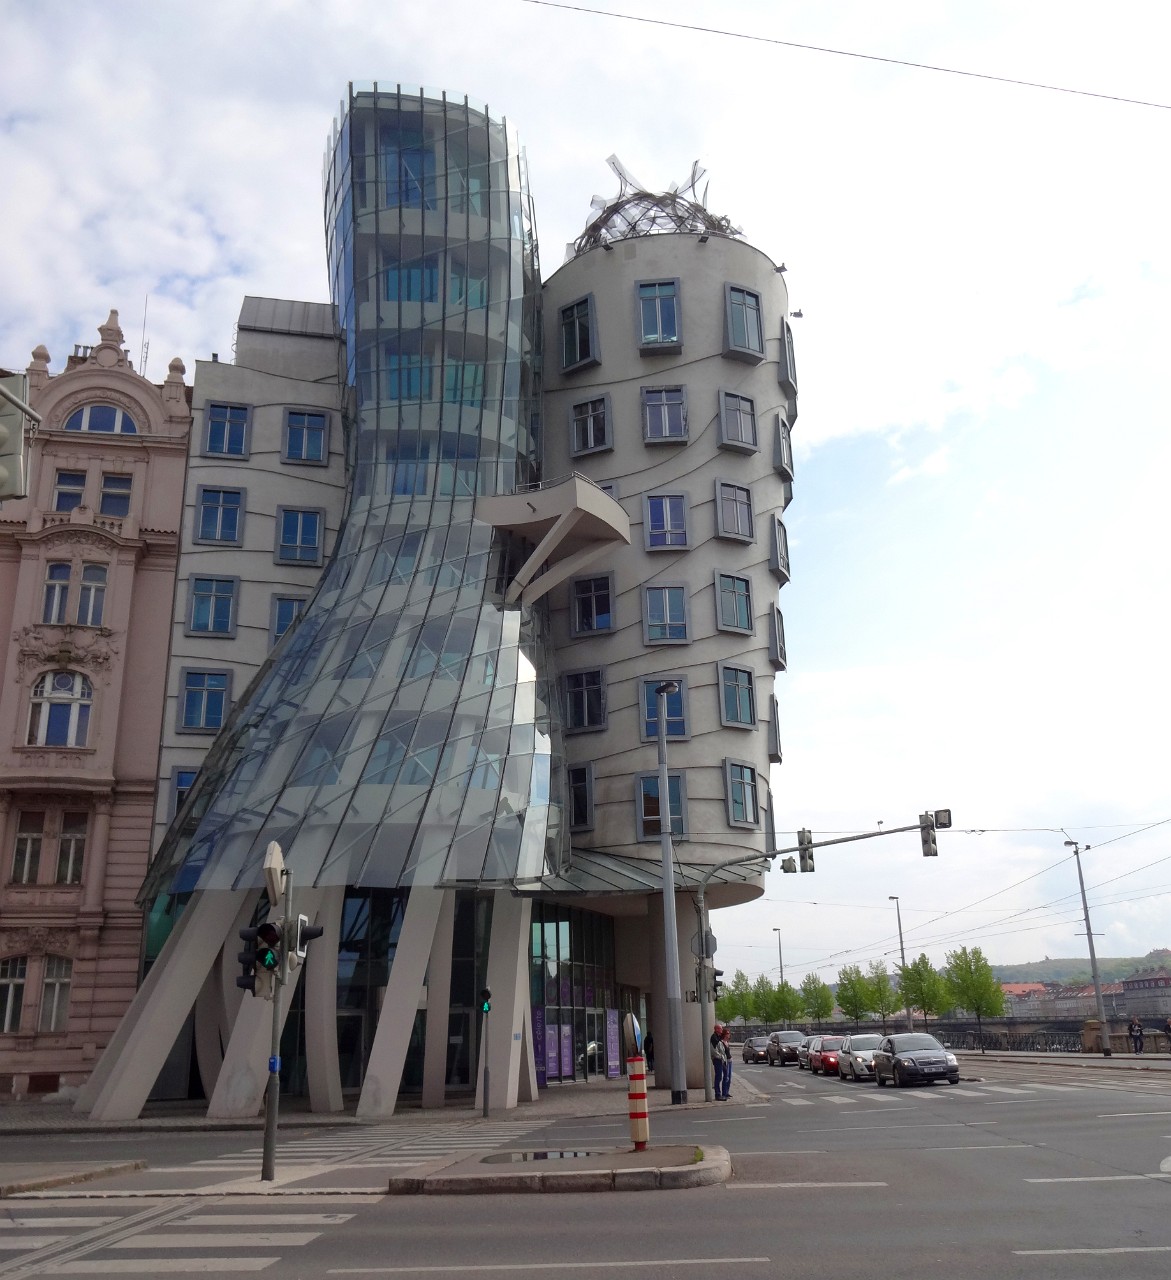 Fred and Ginger Dancing House